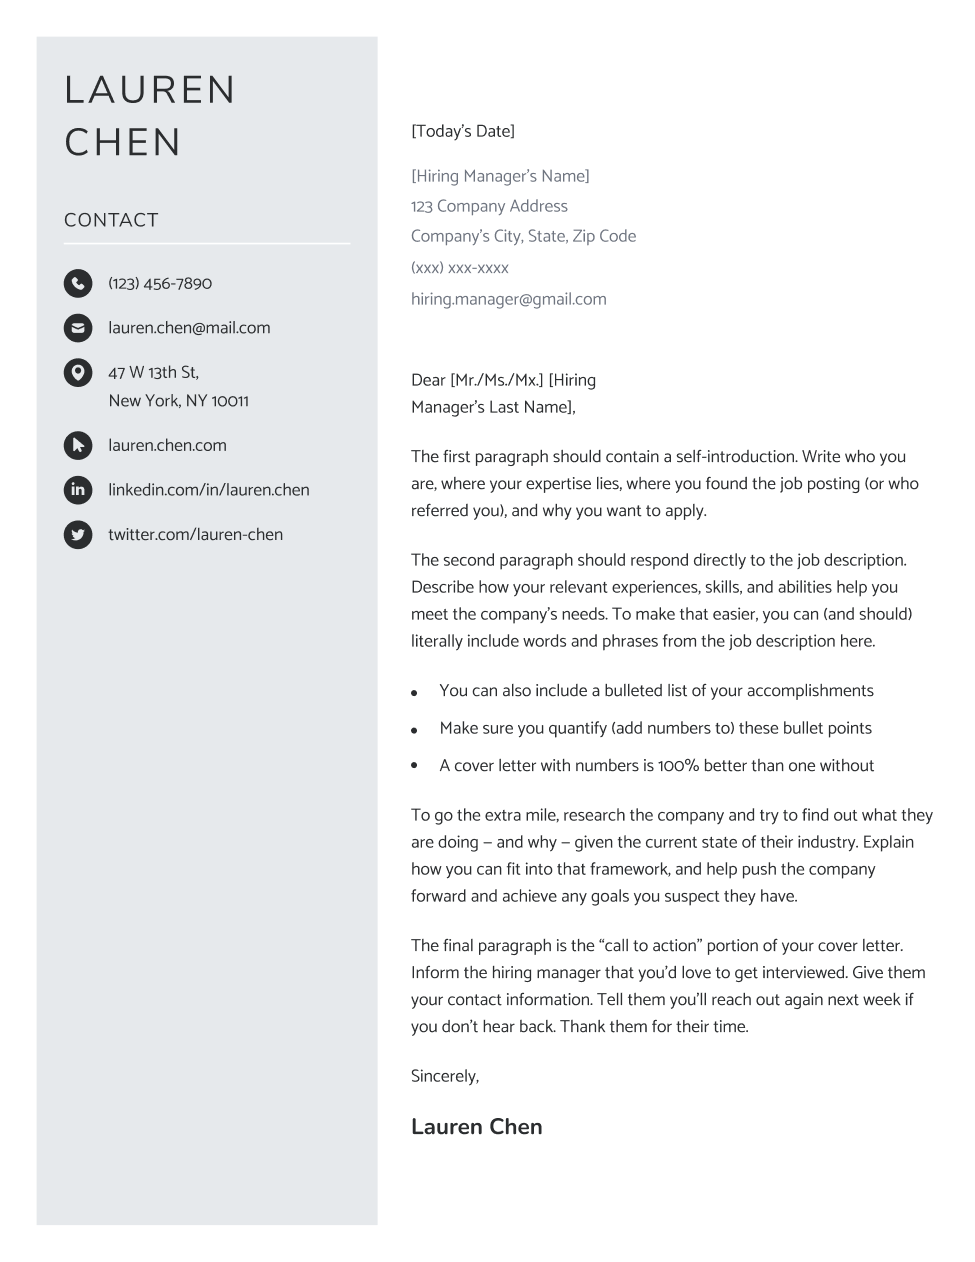 Clean cover letter in gray, with a unique sidebar design that includes your name and contact information.